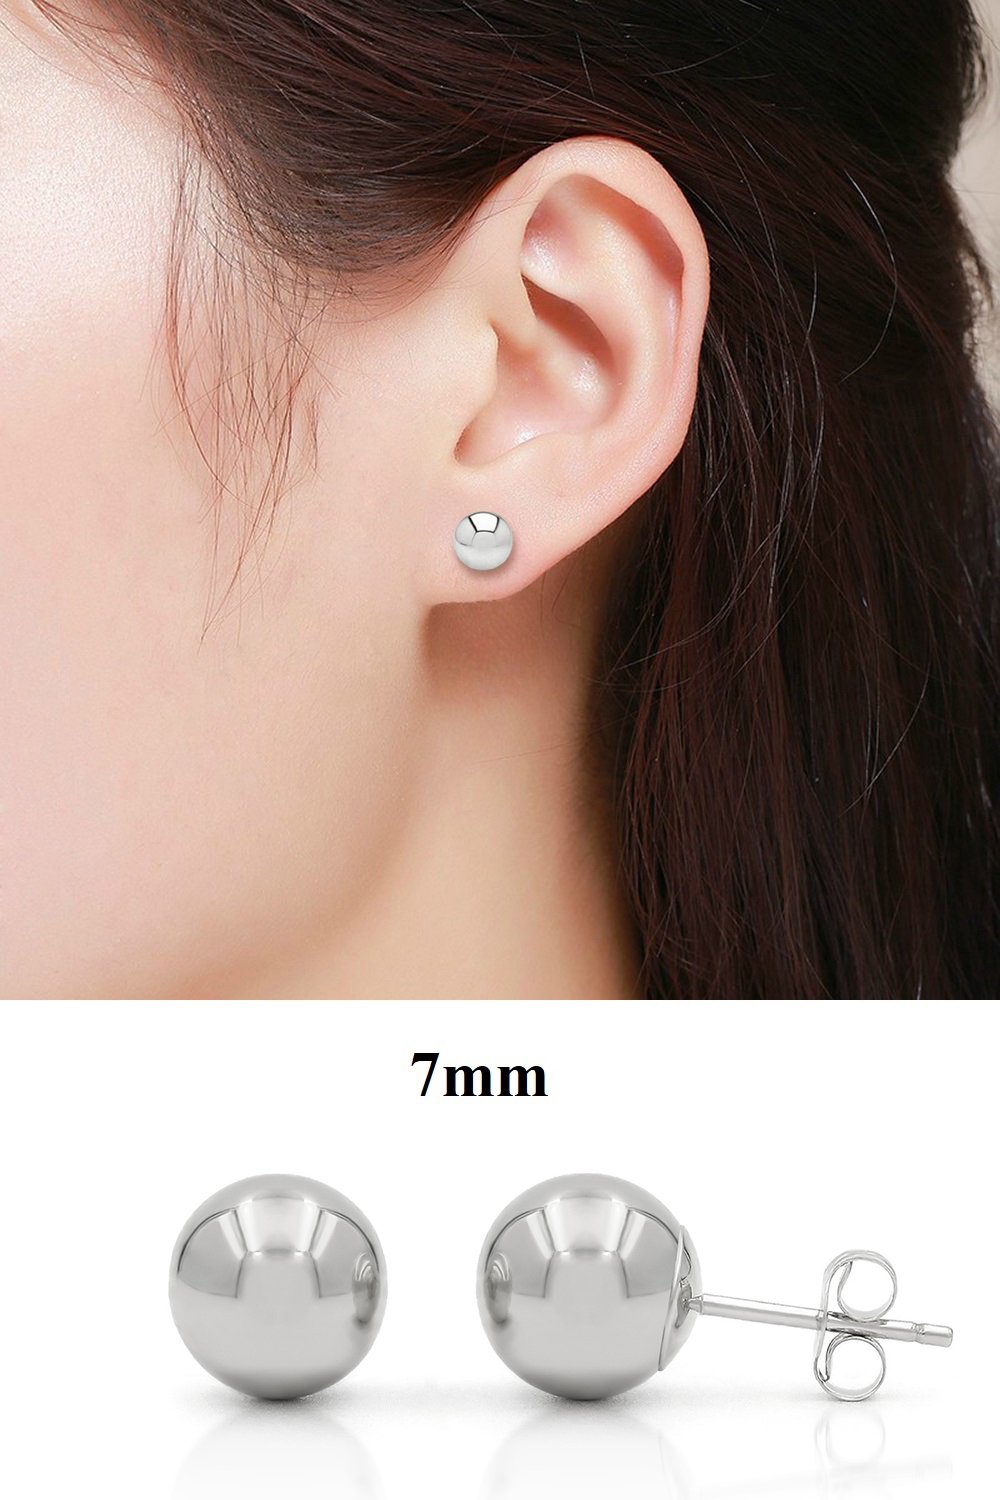 Solid Sterling Silver Ball Earrings / Simple Stud Earrings / Classic 925 Earrings / Silver Ball Earrings / 3mm, 4mm, 5mm, 7MM. 8mm and 10mm